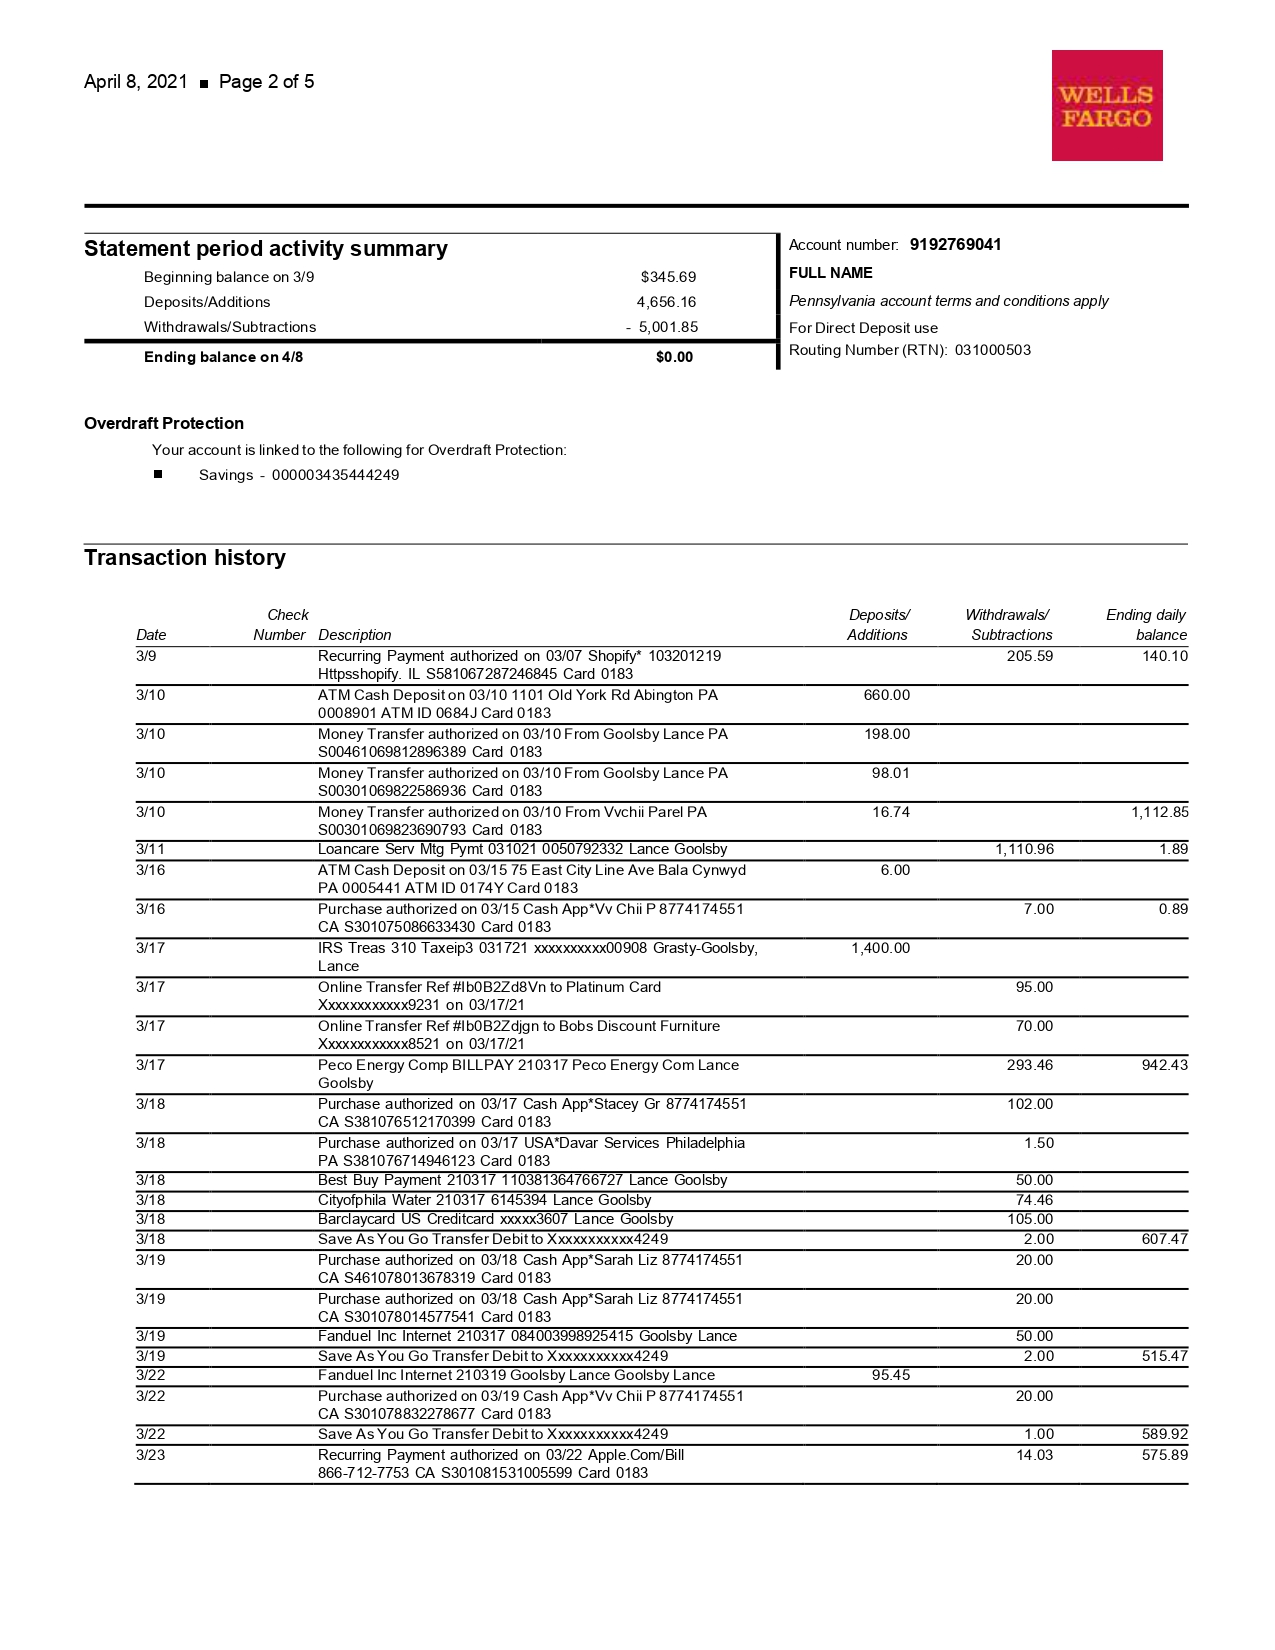 Wells Fargo Bank Statement Template College Checking MbcVirtual